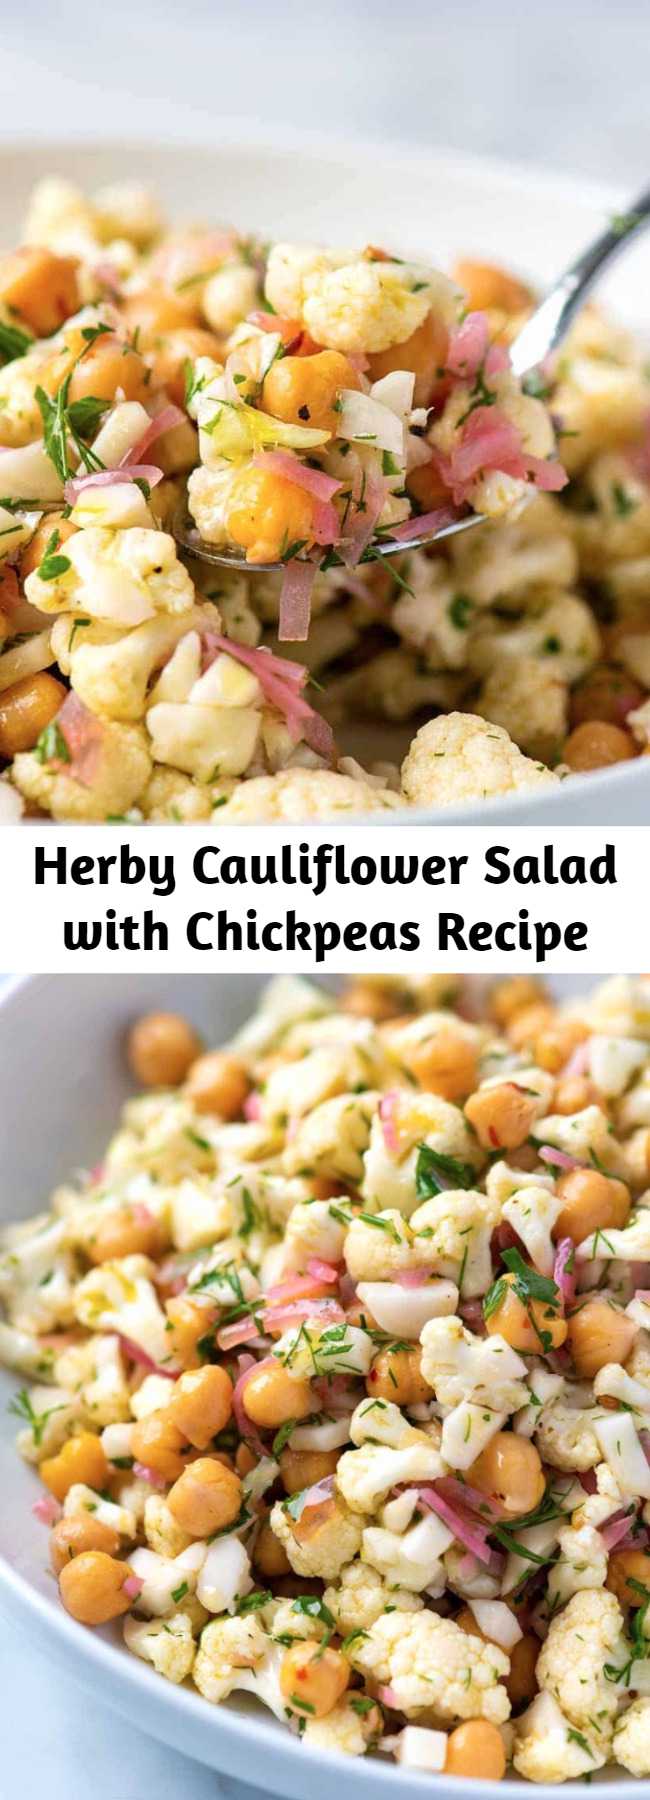 Herby Cauliflower Salad with Chickpeas Recipe - hanks to a light lemony dressing and lots of fresh herbs, this simple raw cauliflower salad recipe tastes surprisingly delicious and lasts in the fridge for days. The pickled onions are an optional ingredient, but they do take the salad to the next level.